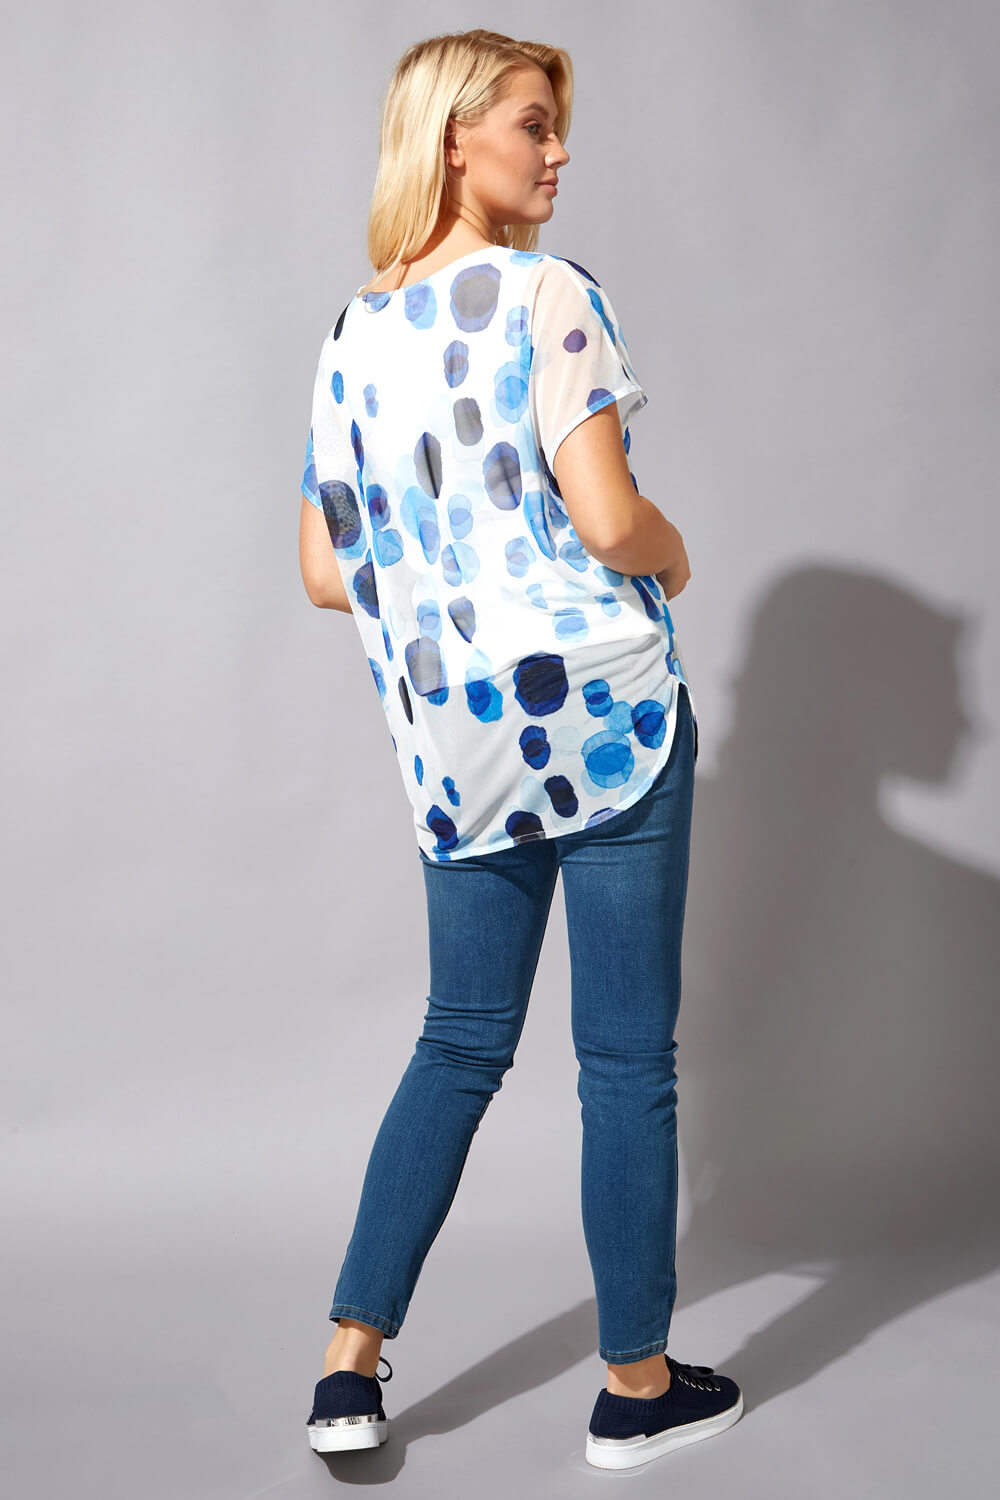 Blue Spot Mesh Overlay Top, Image 3 of 4